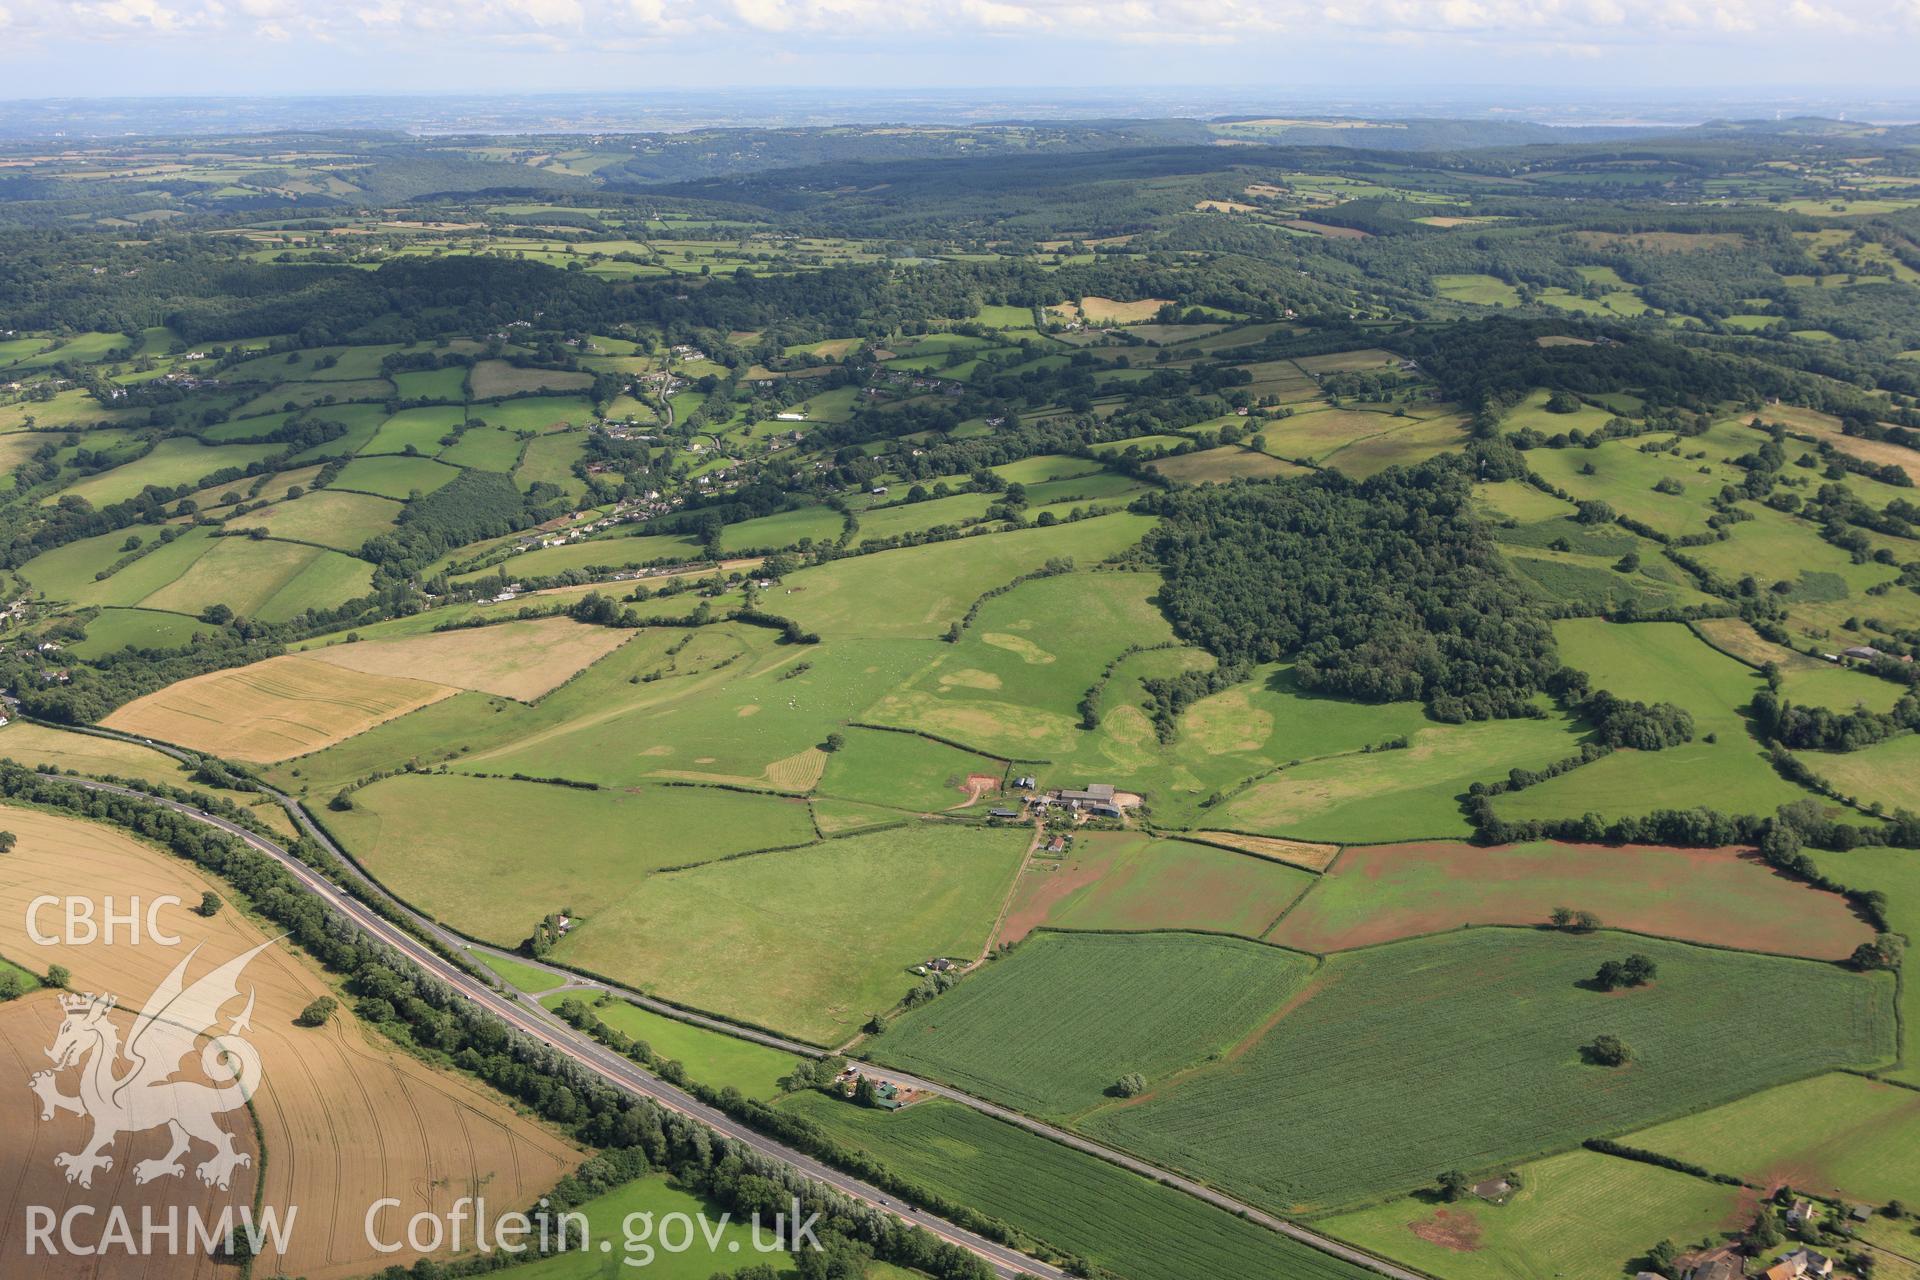 RCAHMW colour oblique aerial photograph of the site of a battle at Craig-y-Dorth, near Monmouth, from the north. Taken on 23 July 2009 by Toby Driver